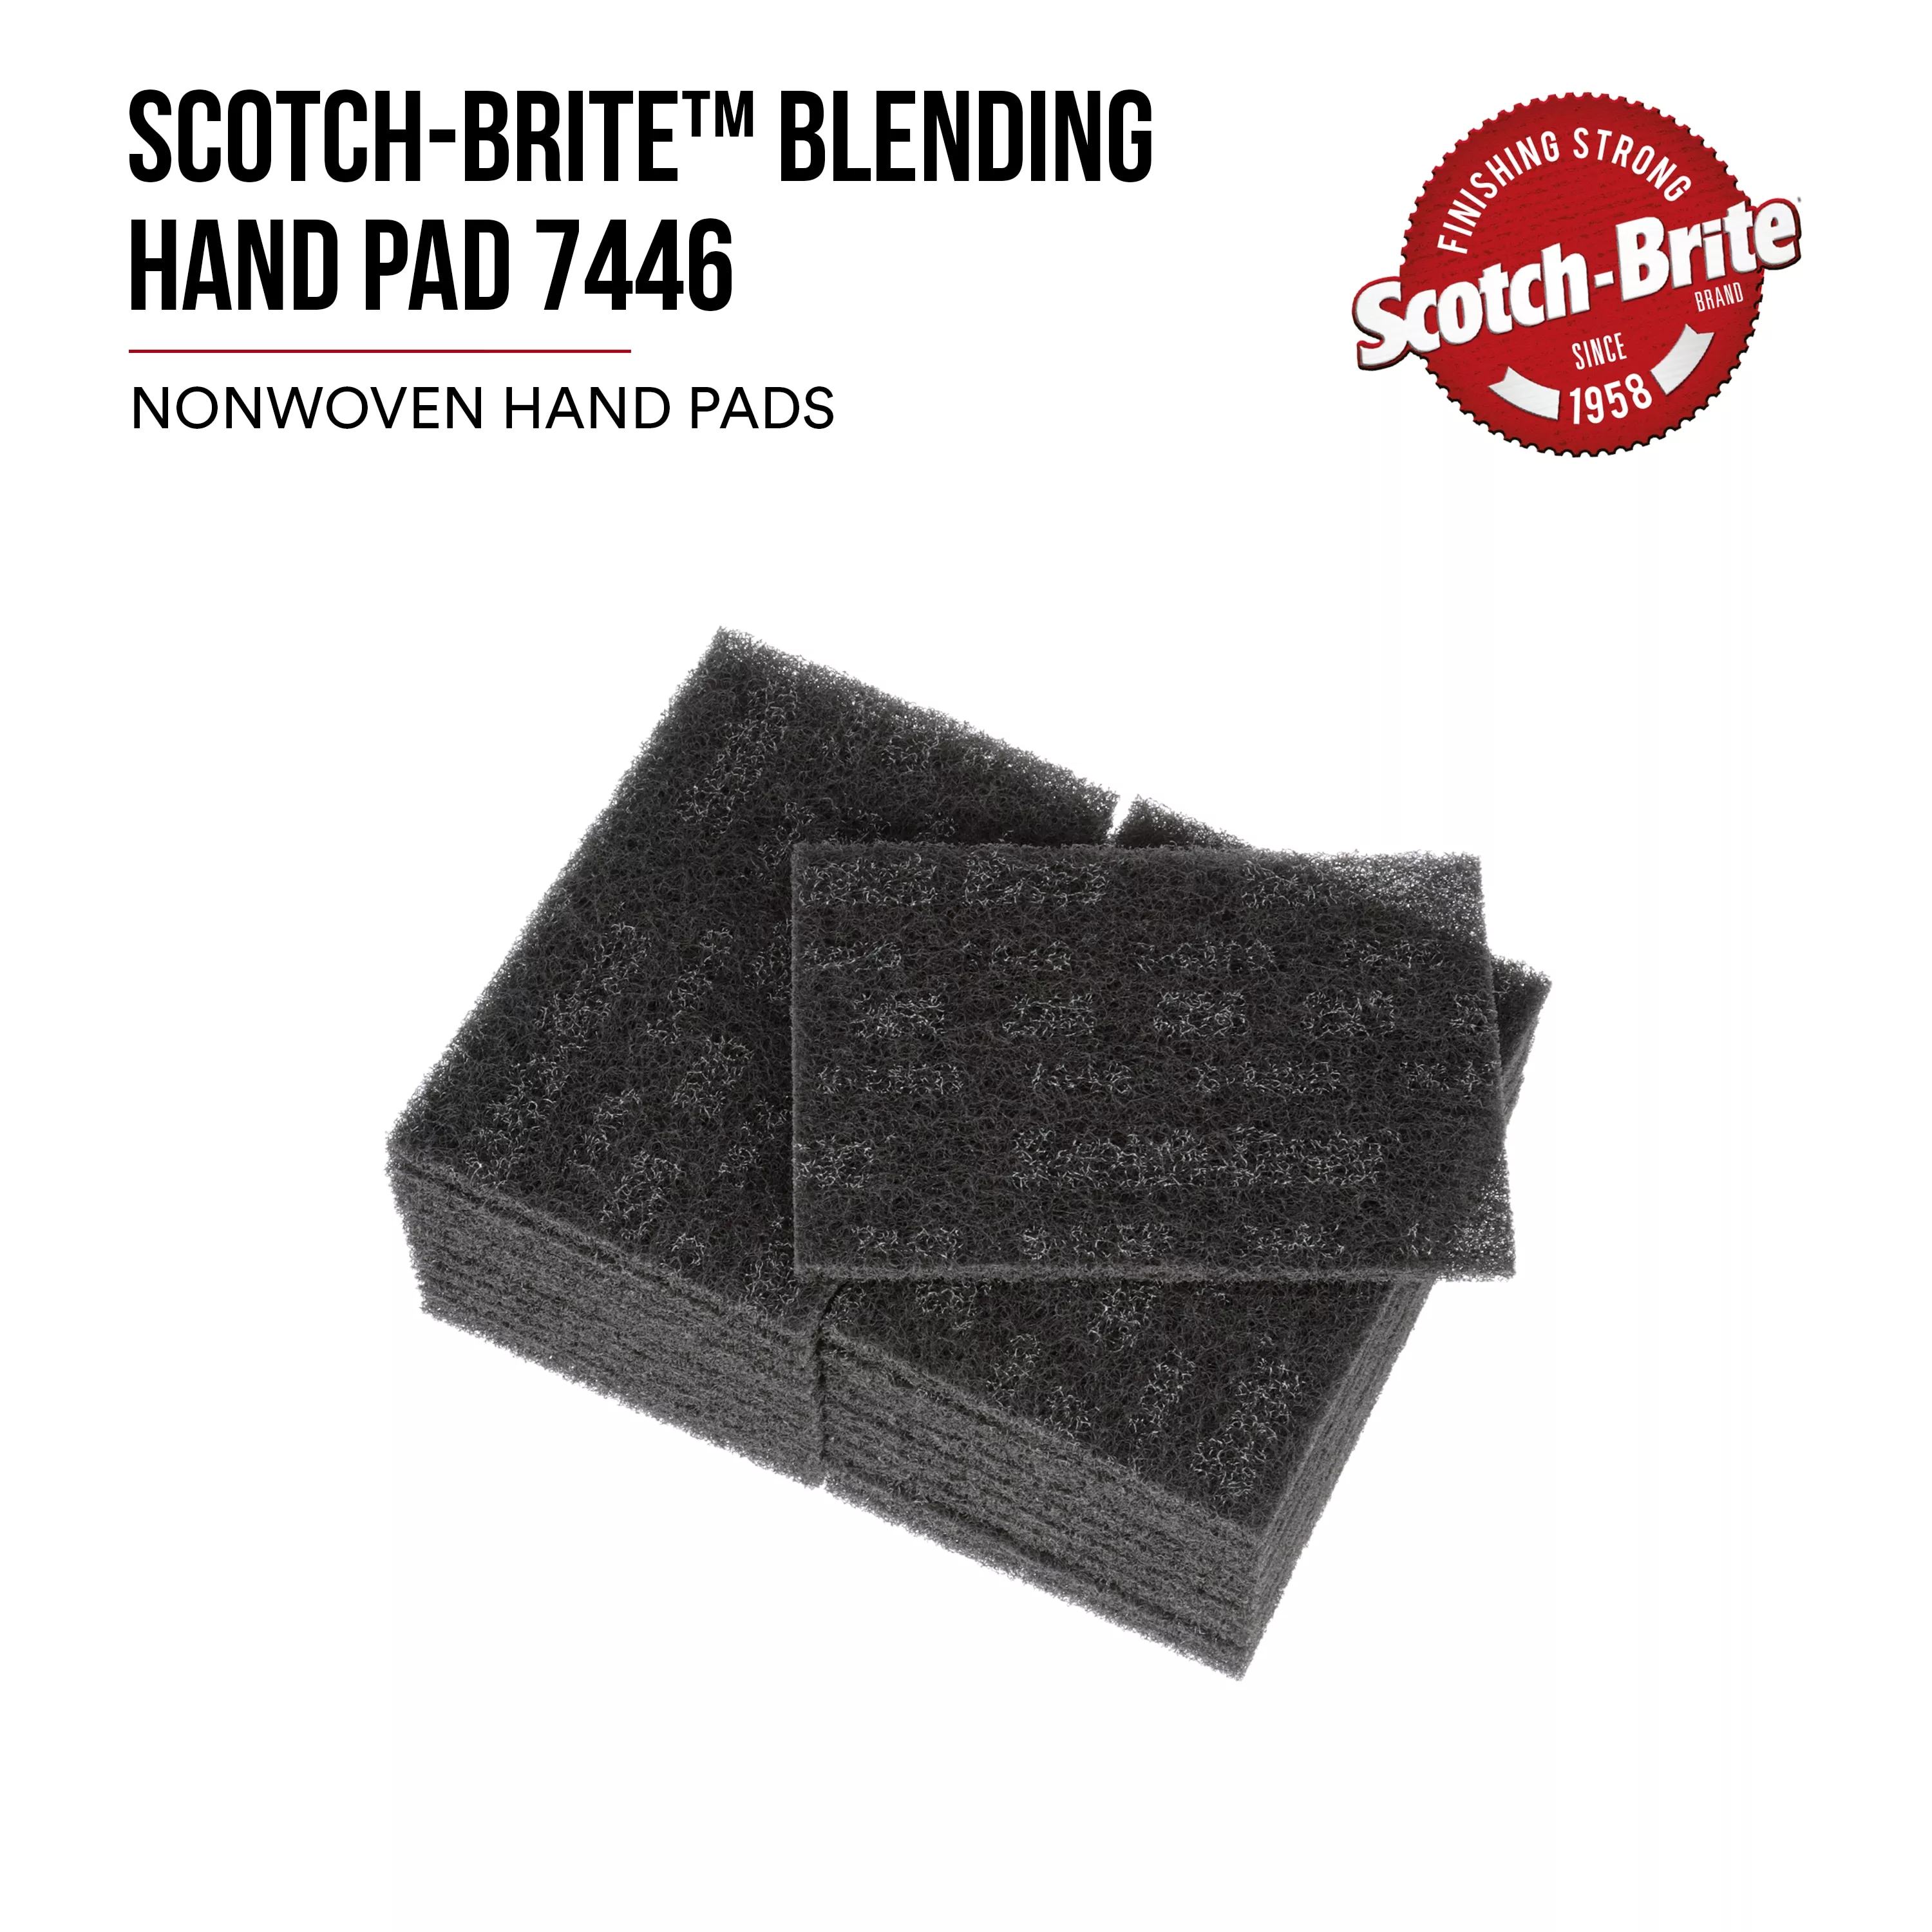 Product Number HP-HP 7446 | Scotch-Brite™ Blending Hand Pad 7446